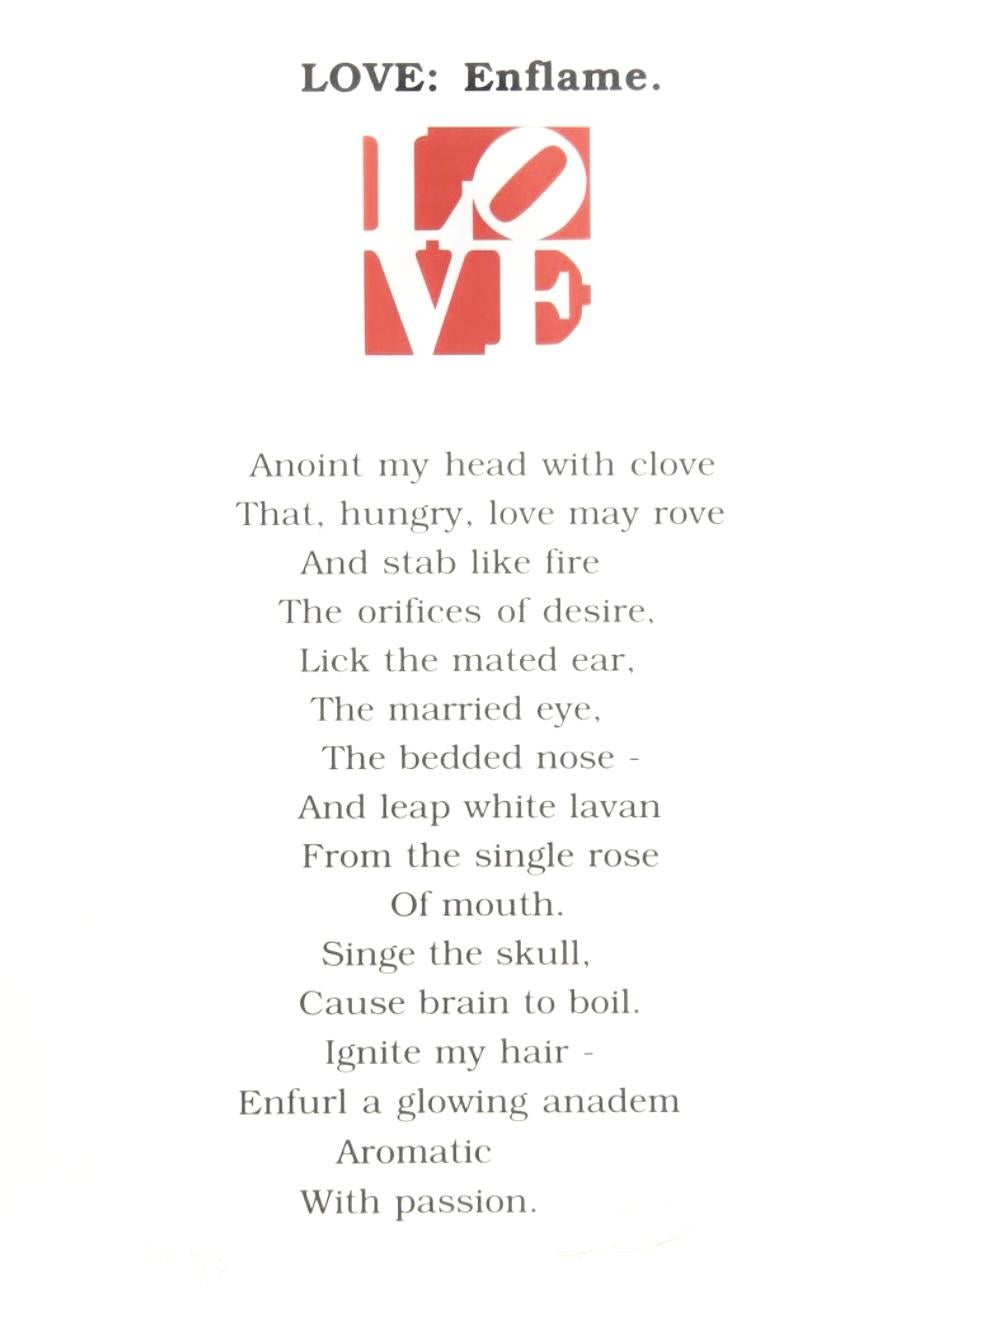 LOVE: Enflame (From The Book of Love Portfolio)